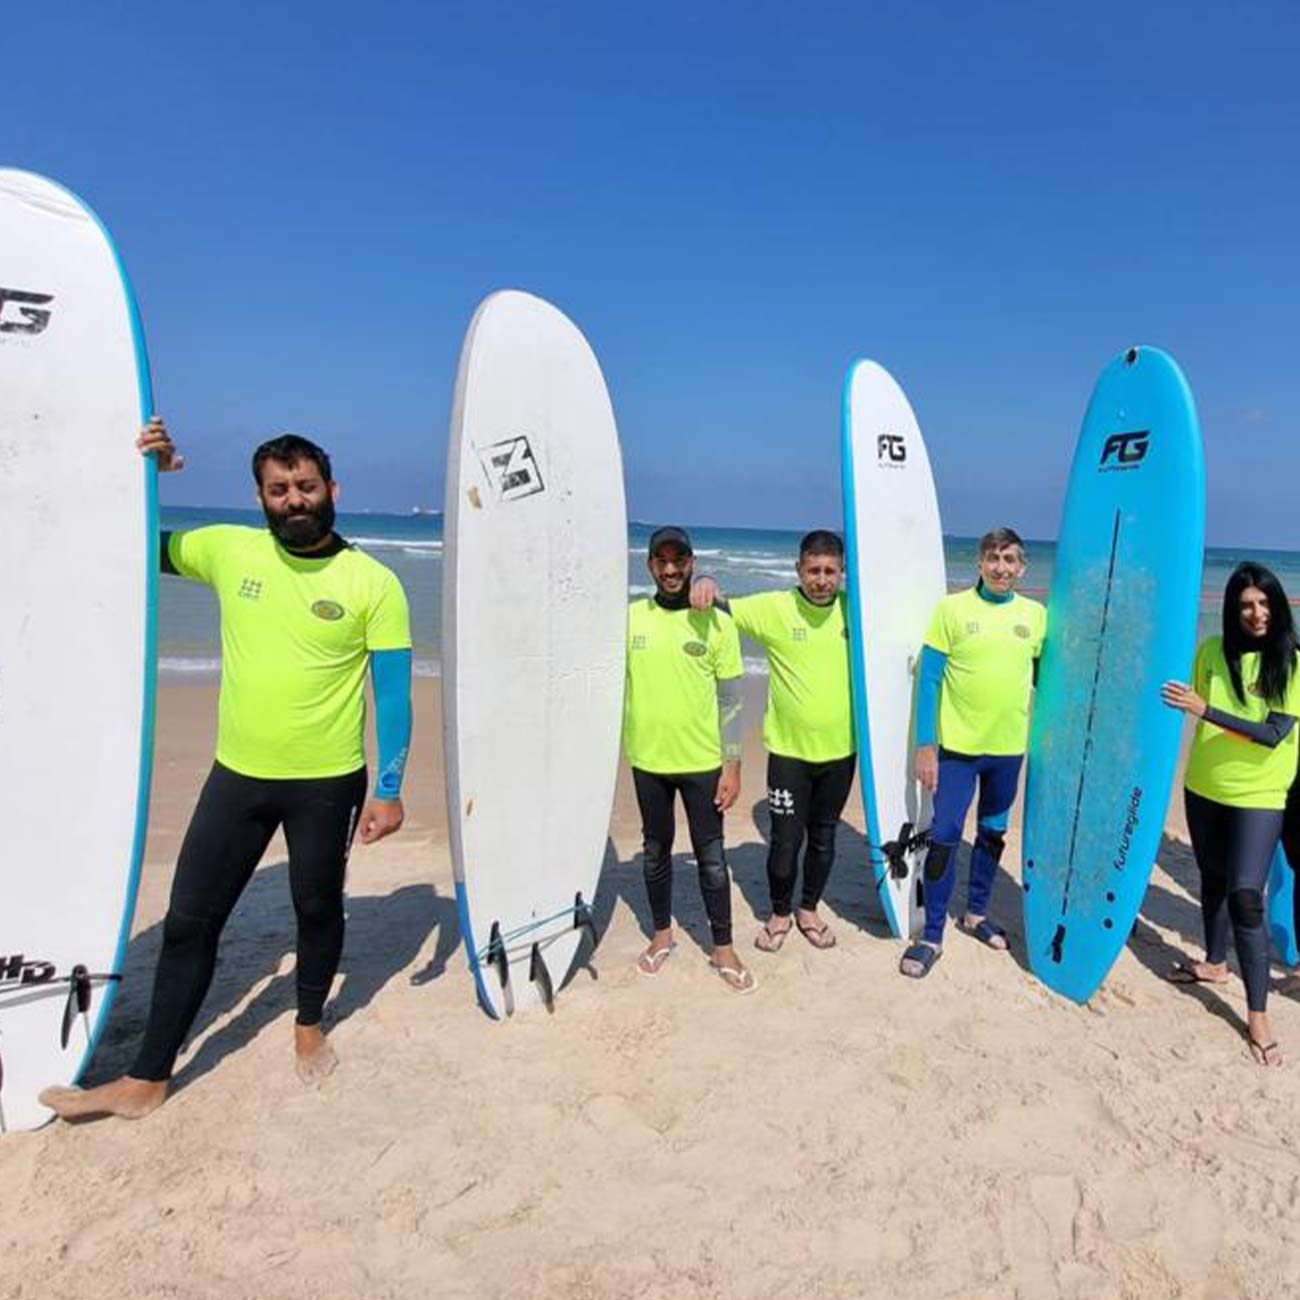 Electra FM employees pose with surfboards at the beach